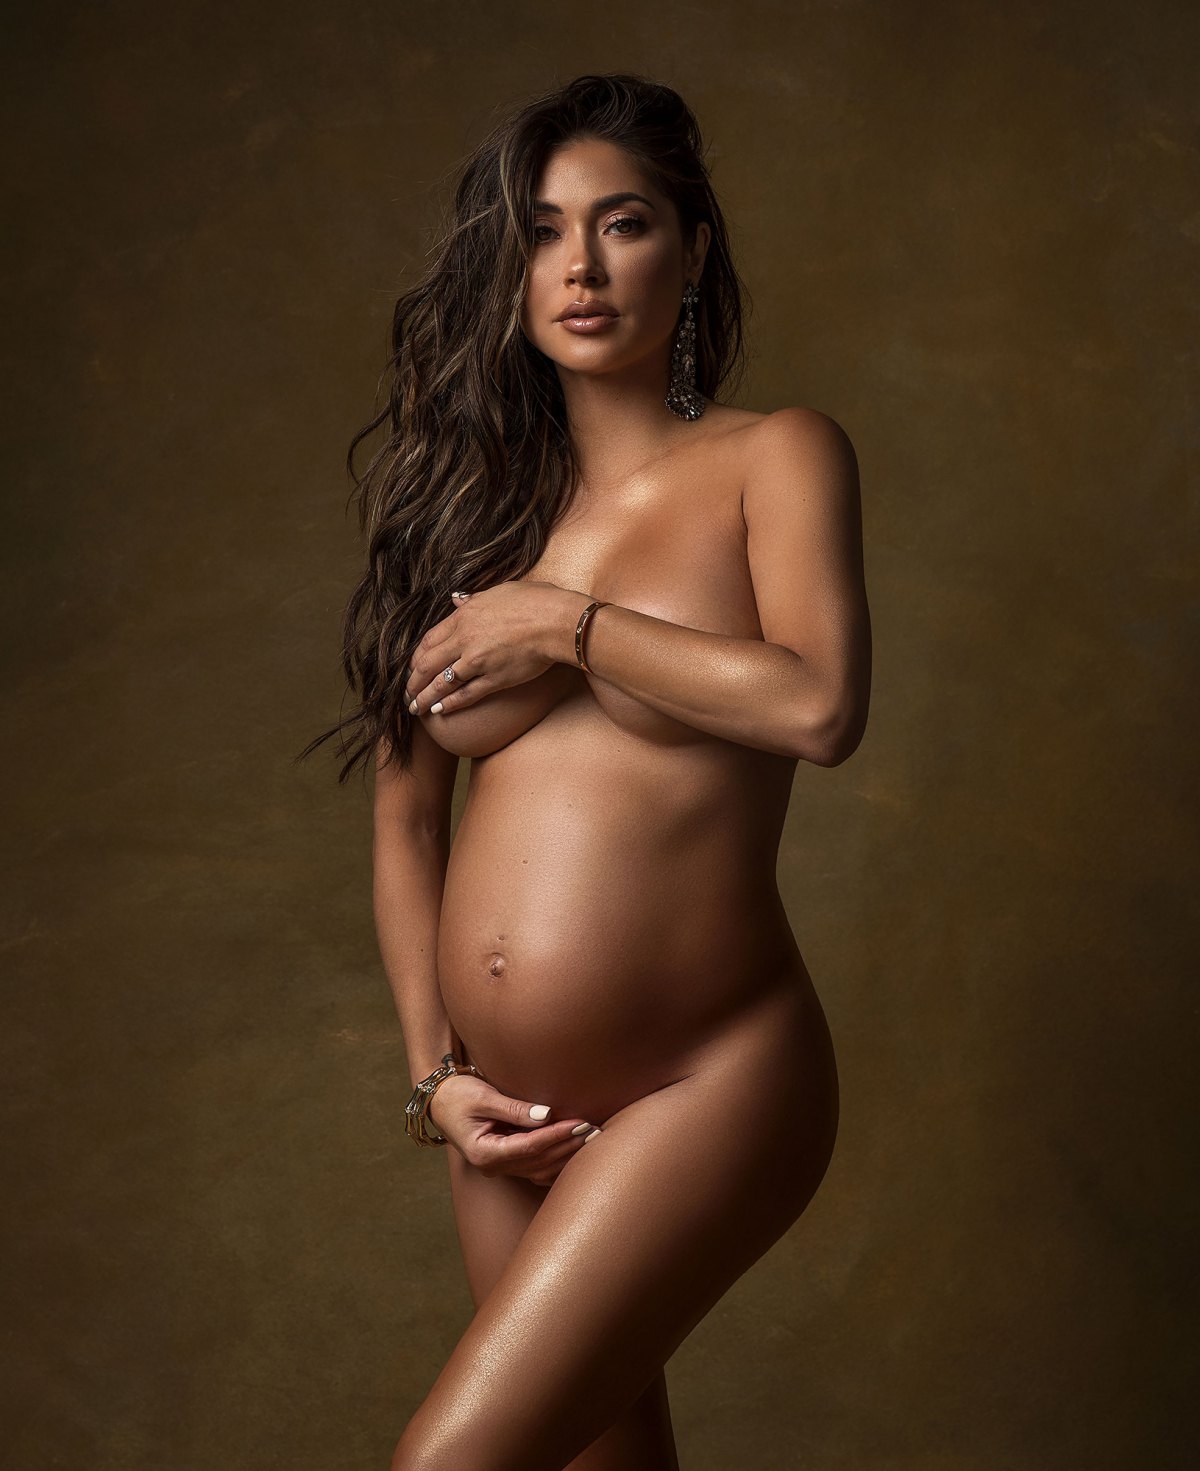 Hot Pregnant Celebrities Pussy - Celebrities Posing Nude While Pregnant: Maternity Pics